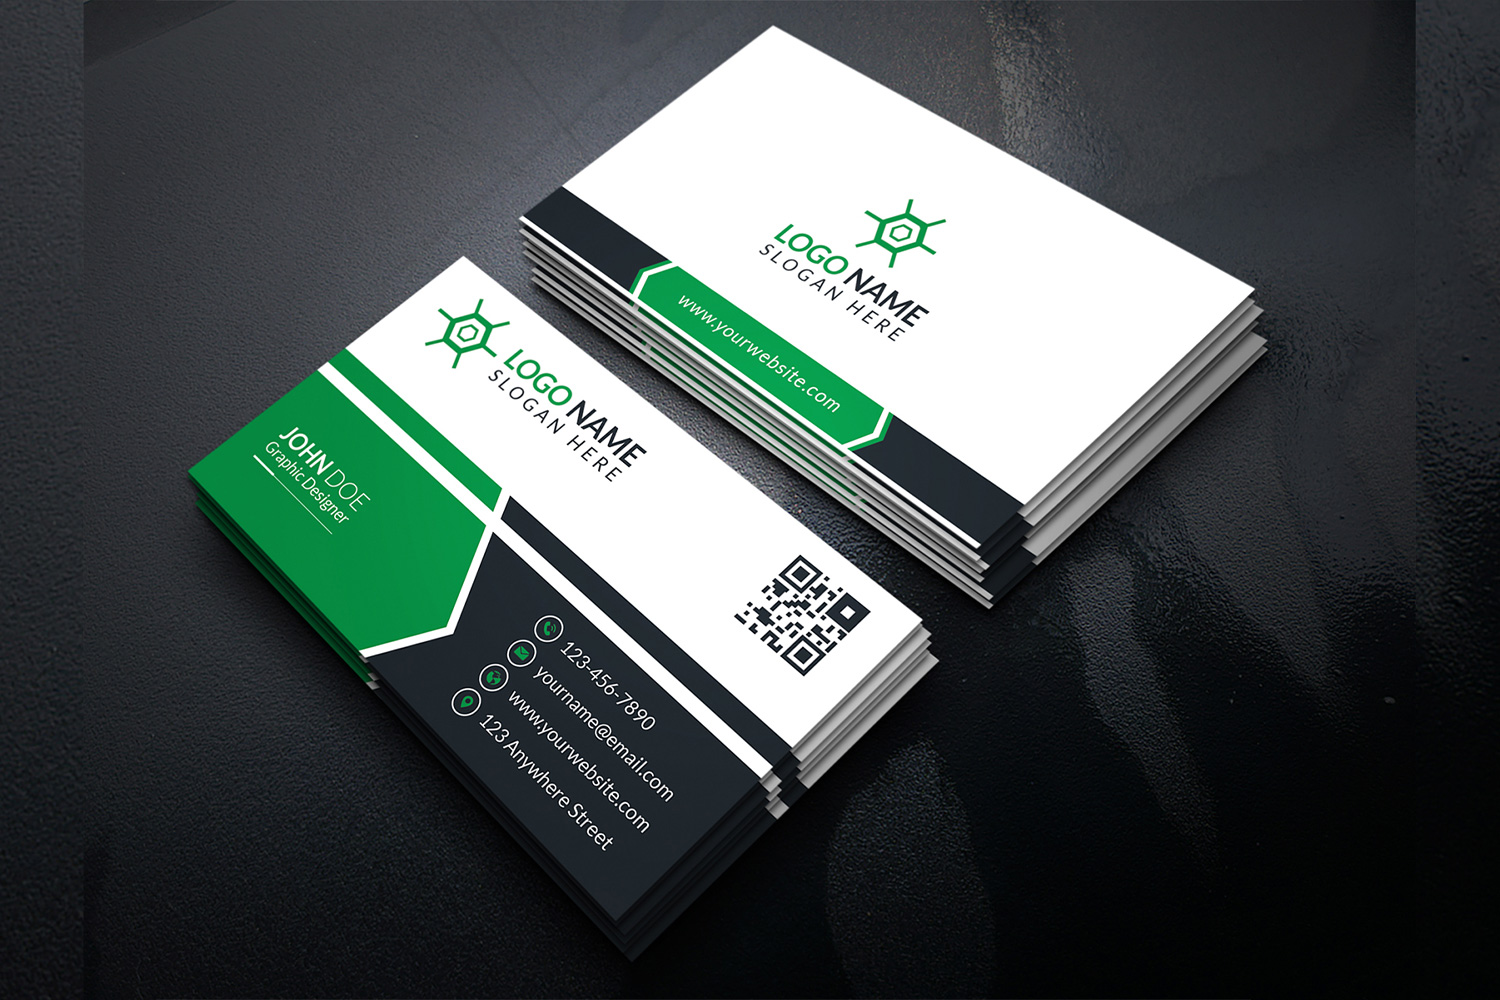 Light business card with green elements.